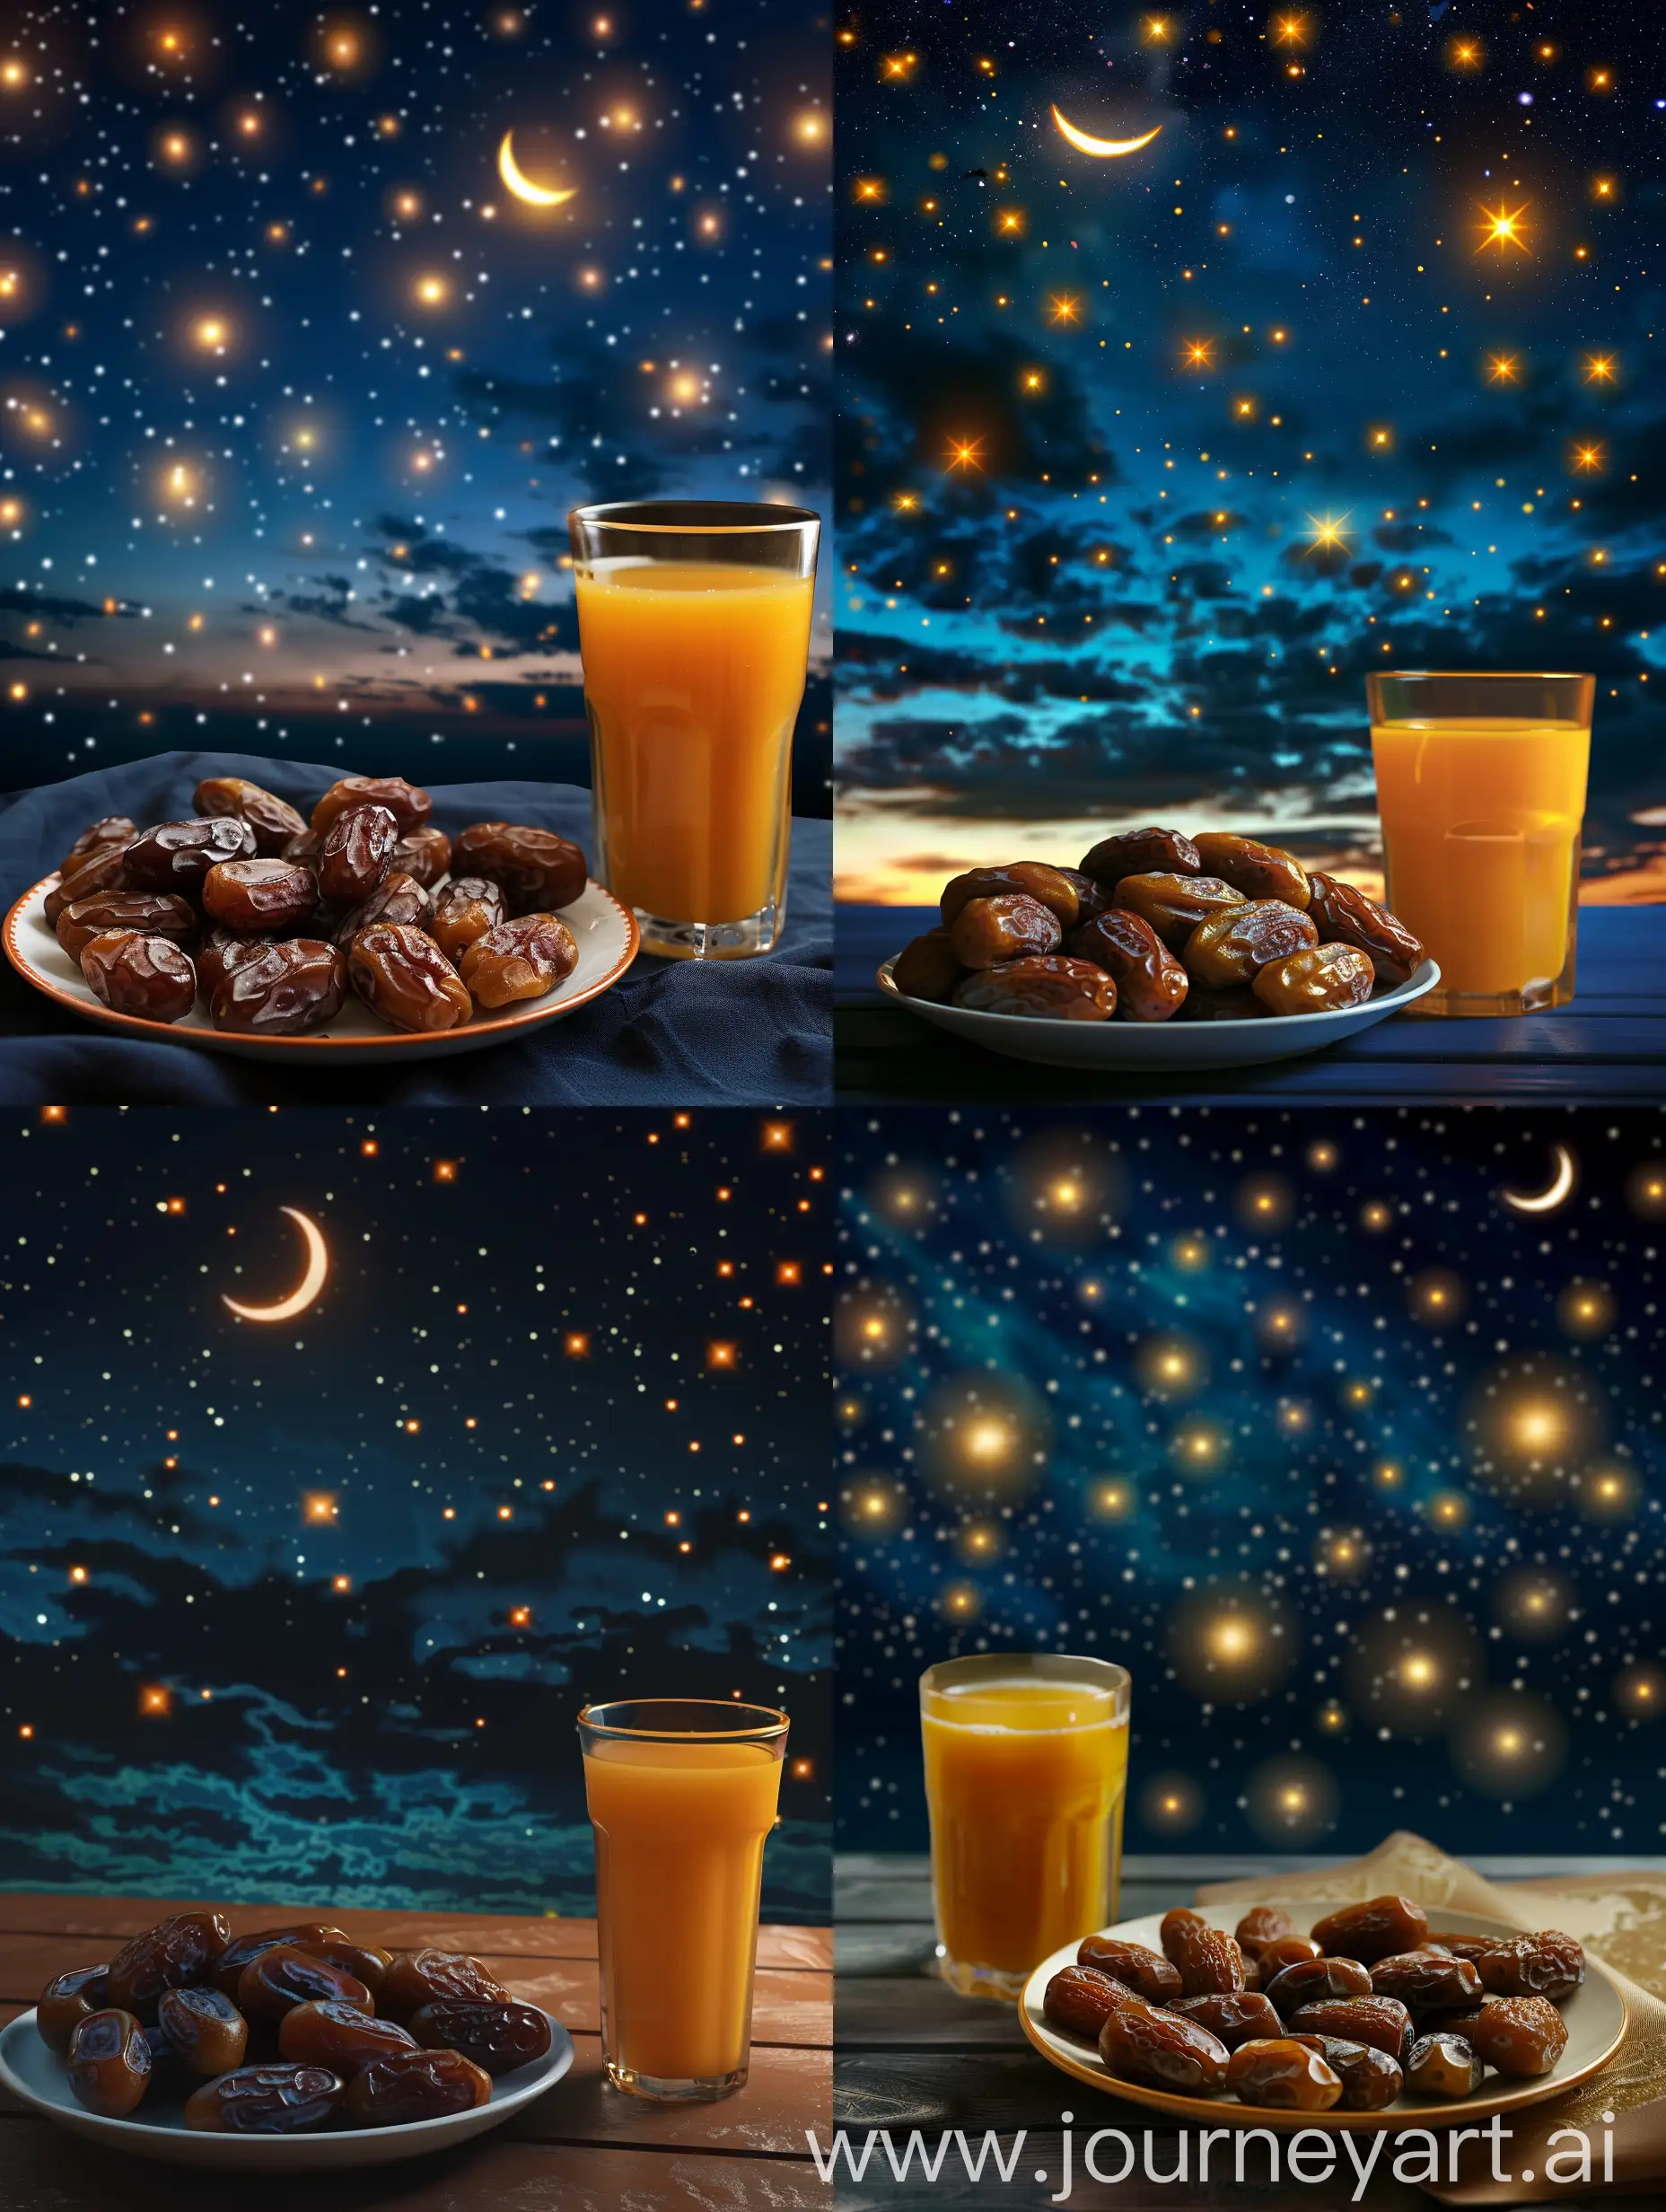 Elegant-Iftar-Meal-Plate-of-Dates-and-Glass-of-Orange-Juice-Under-Starlit-Night-Sky